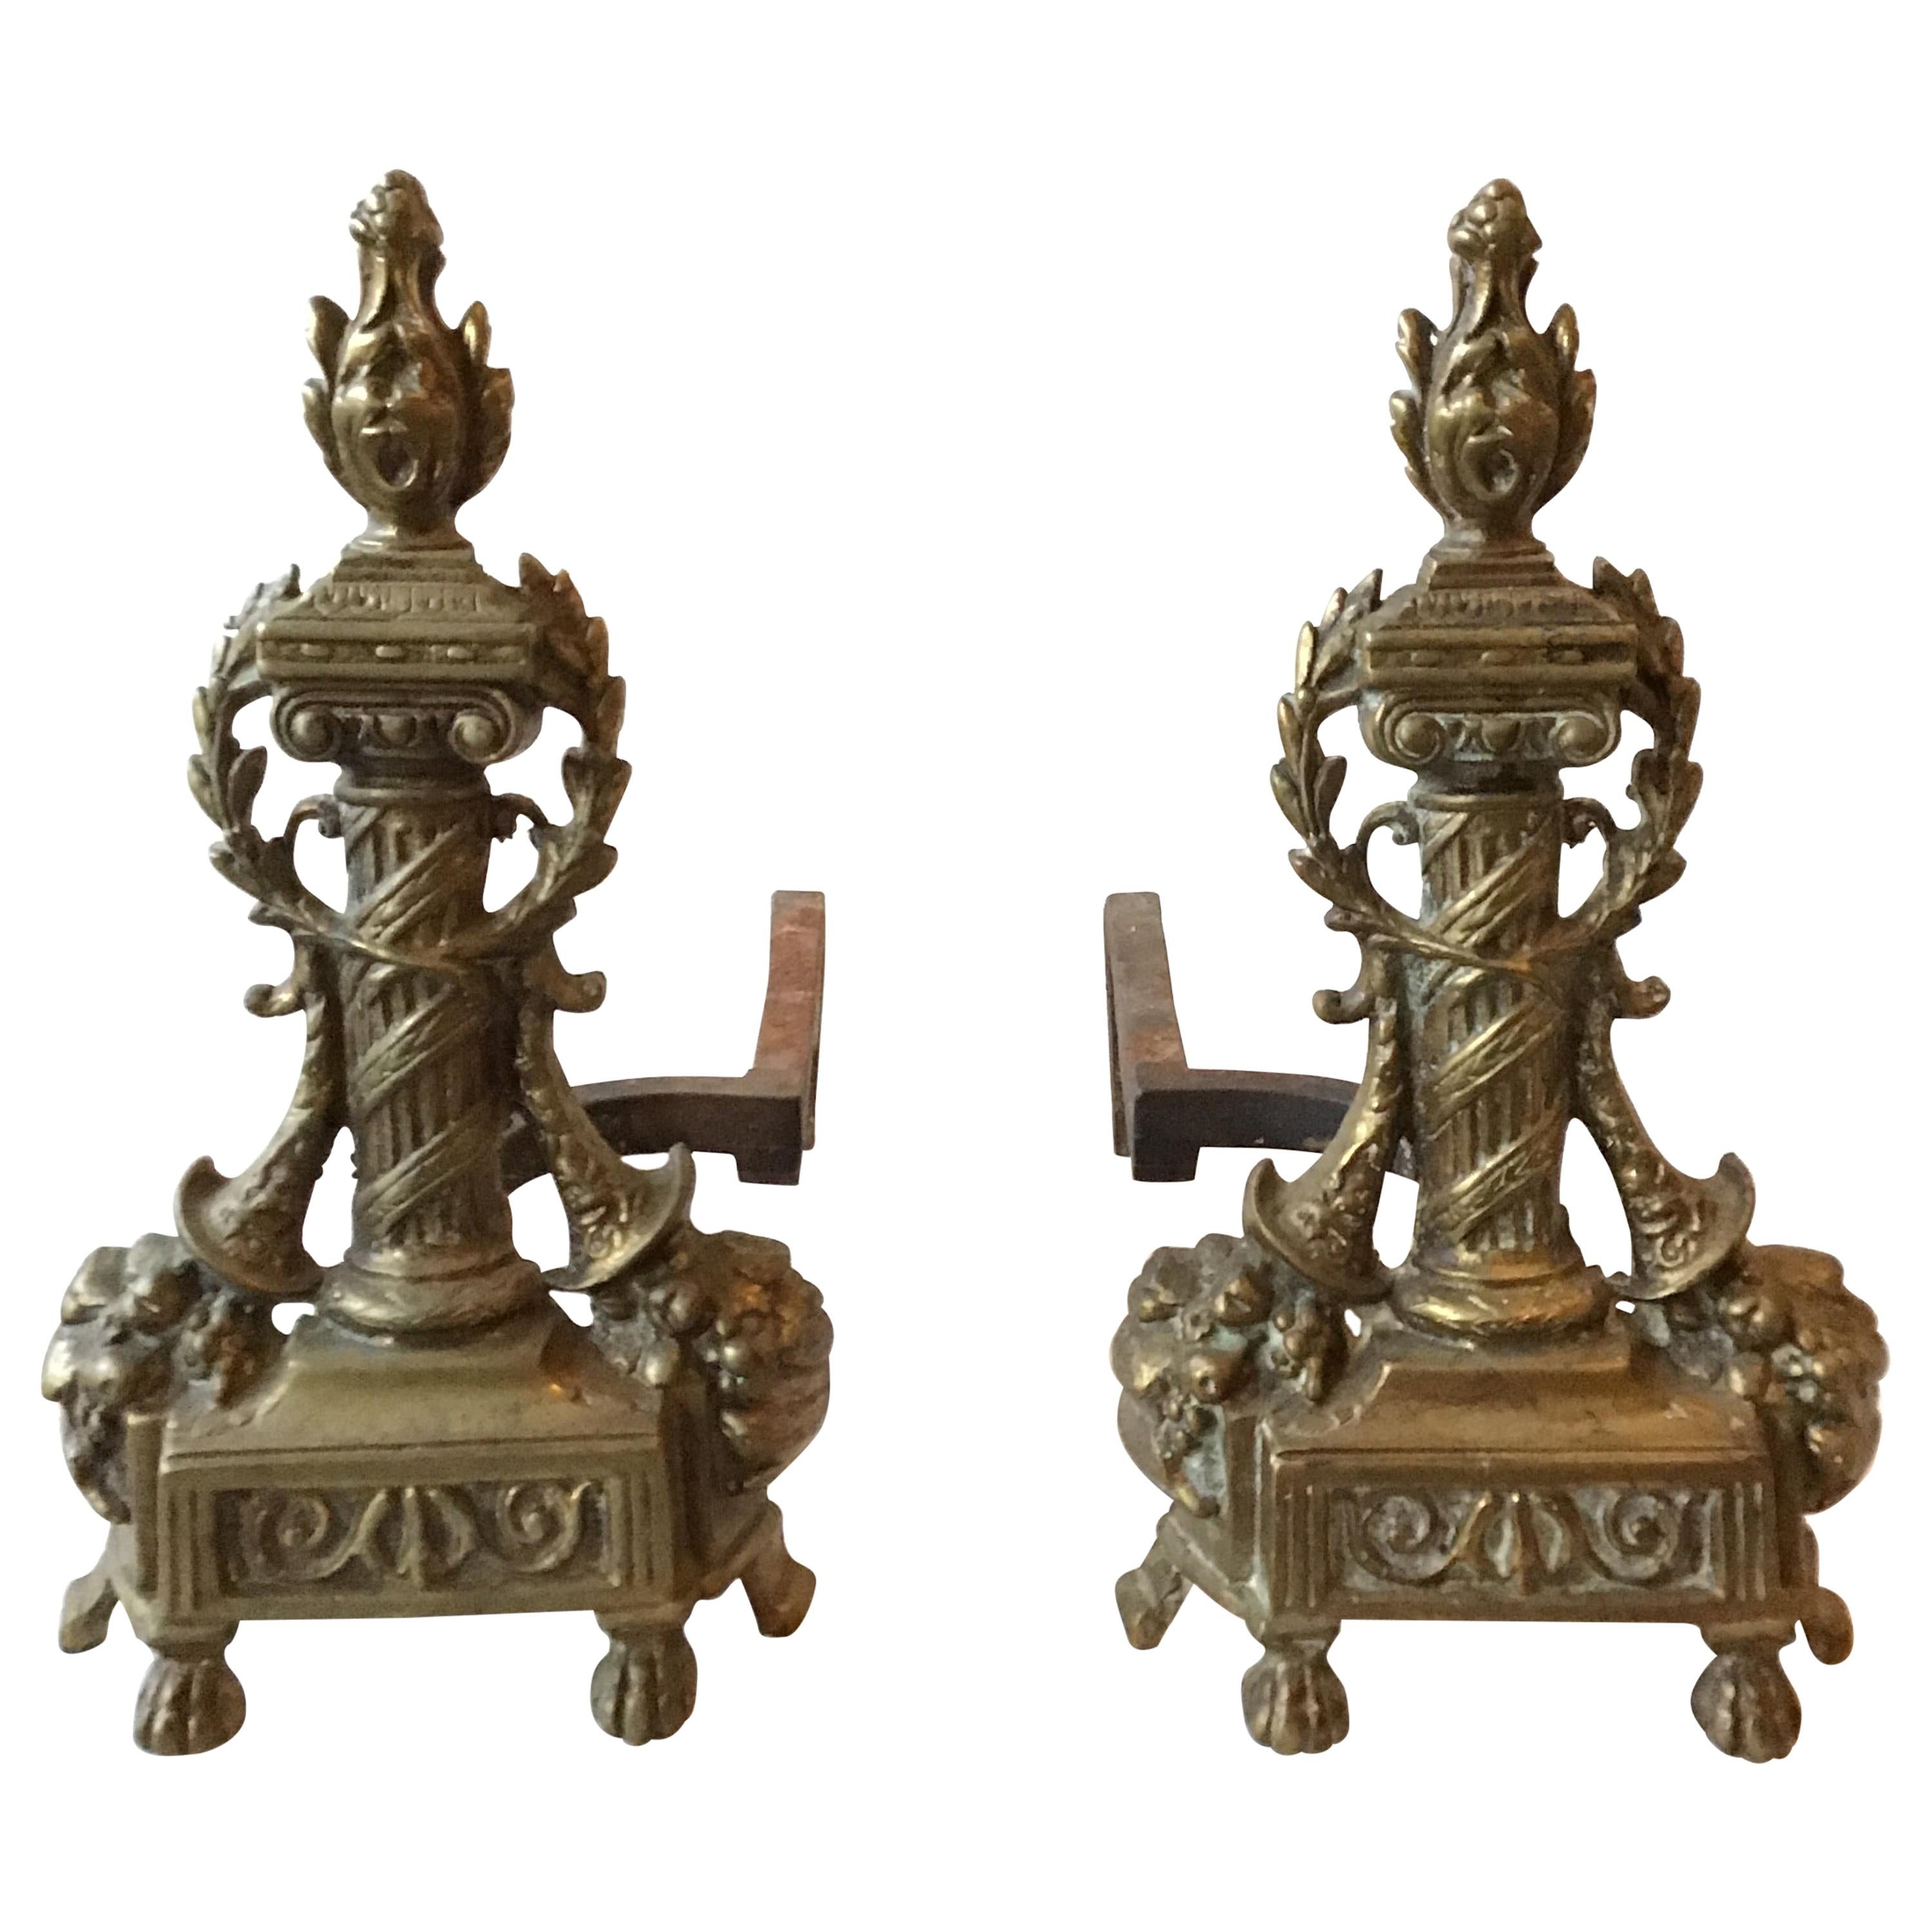 1920s Antique Brass Ornate Andirons For Sale